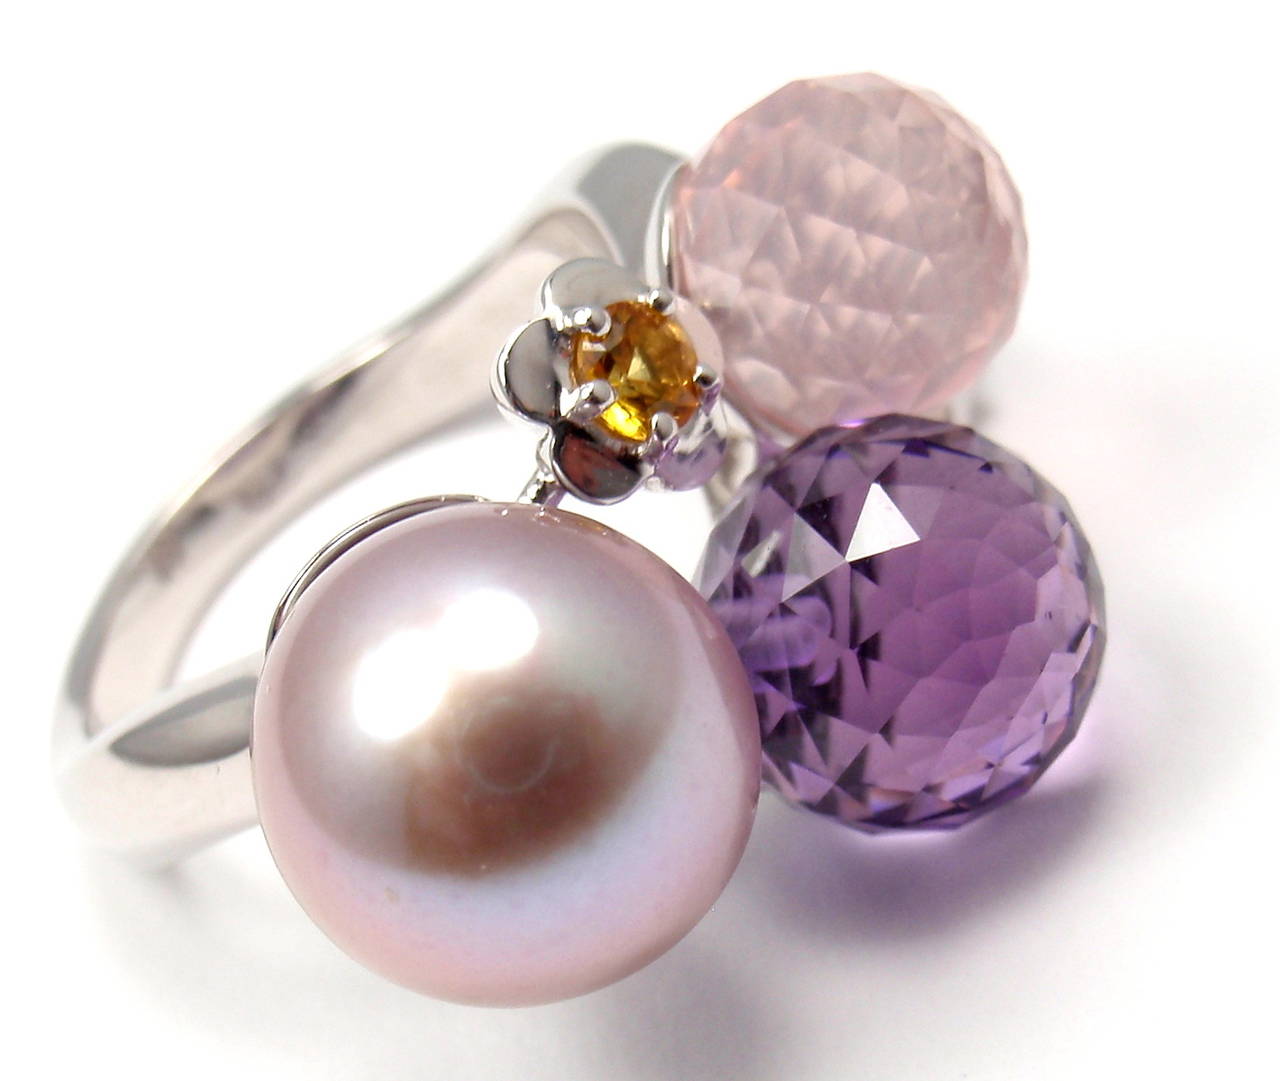 18k White Gold Amethyst Pearl Sapphire RIng by Chanel. 
With 1 x 11mm Grey Pearl
1 x 10mm Amethyst
1 x 10mm Pink Tourmaline
2 Sapphires (pink & yellow)

Details: 
Ring Size: Size: 6
Width:  15mm
Weight:  9.8 grams
Stamped Hallmarks: 